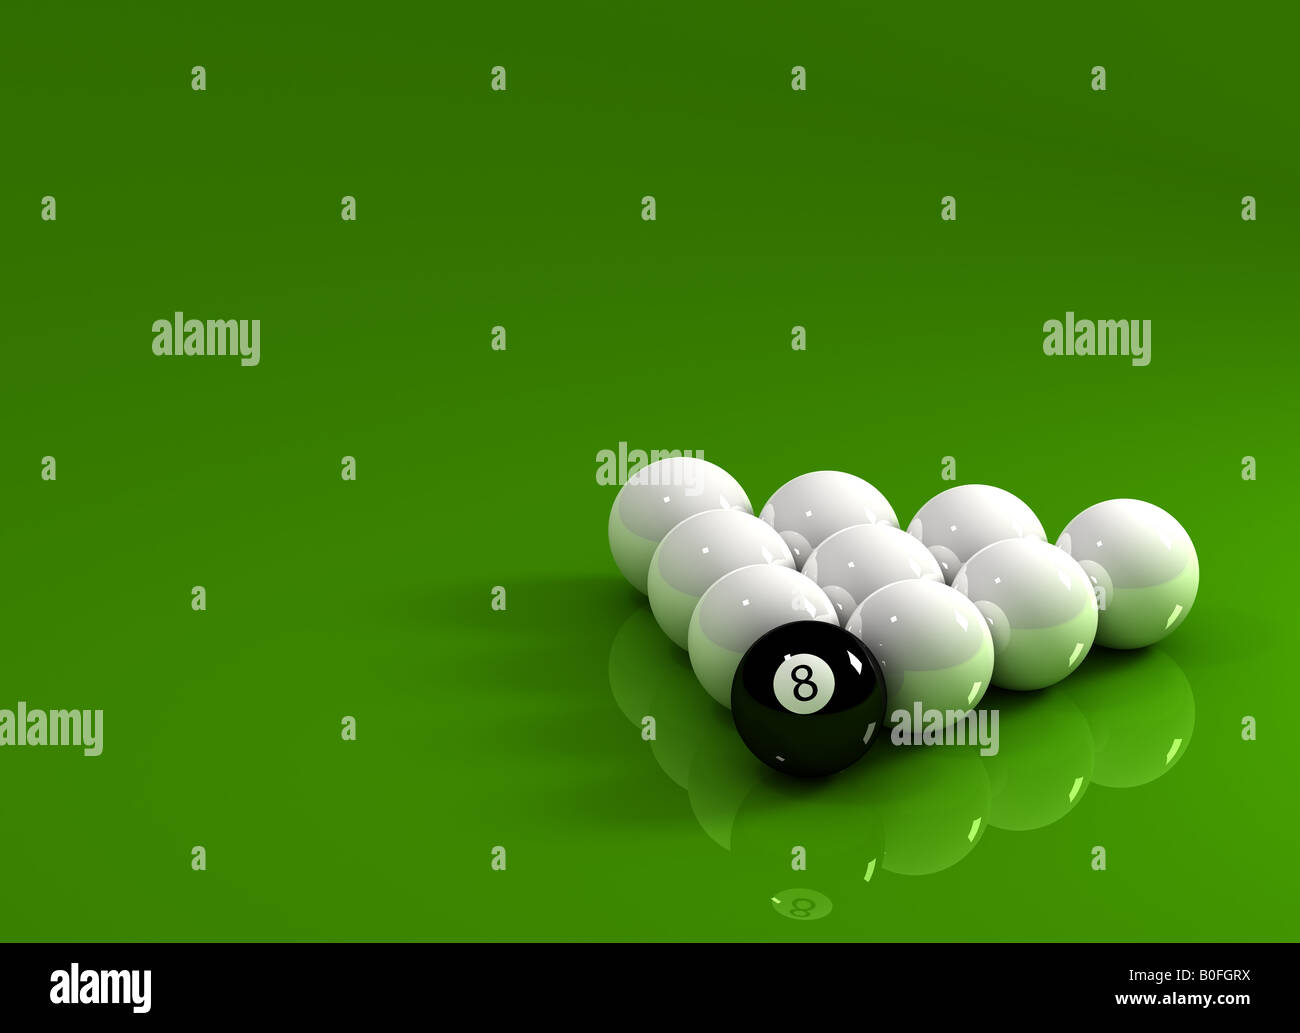 Eight Ball in front of nine white Billiard balls over reflective surface Stock Photo